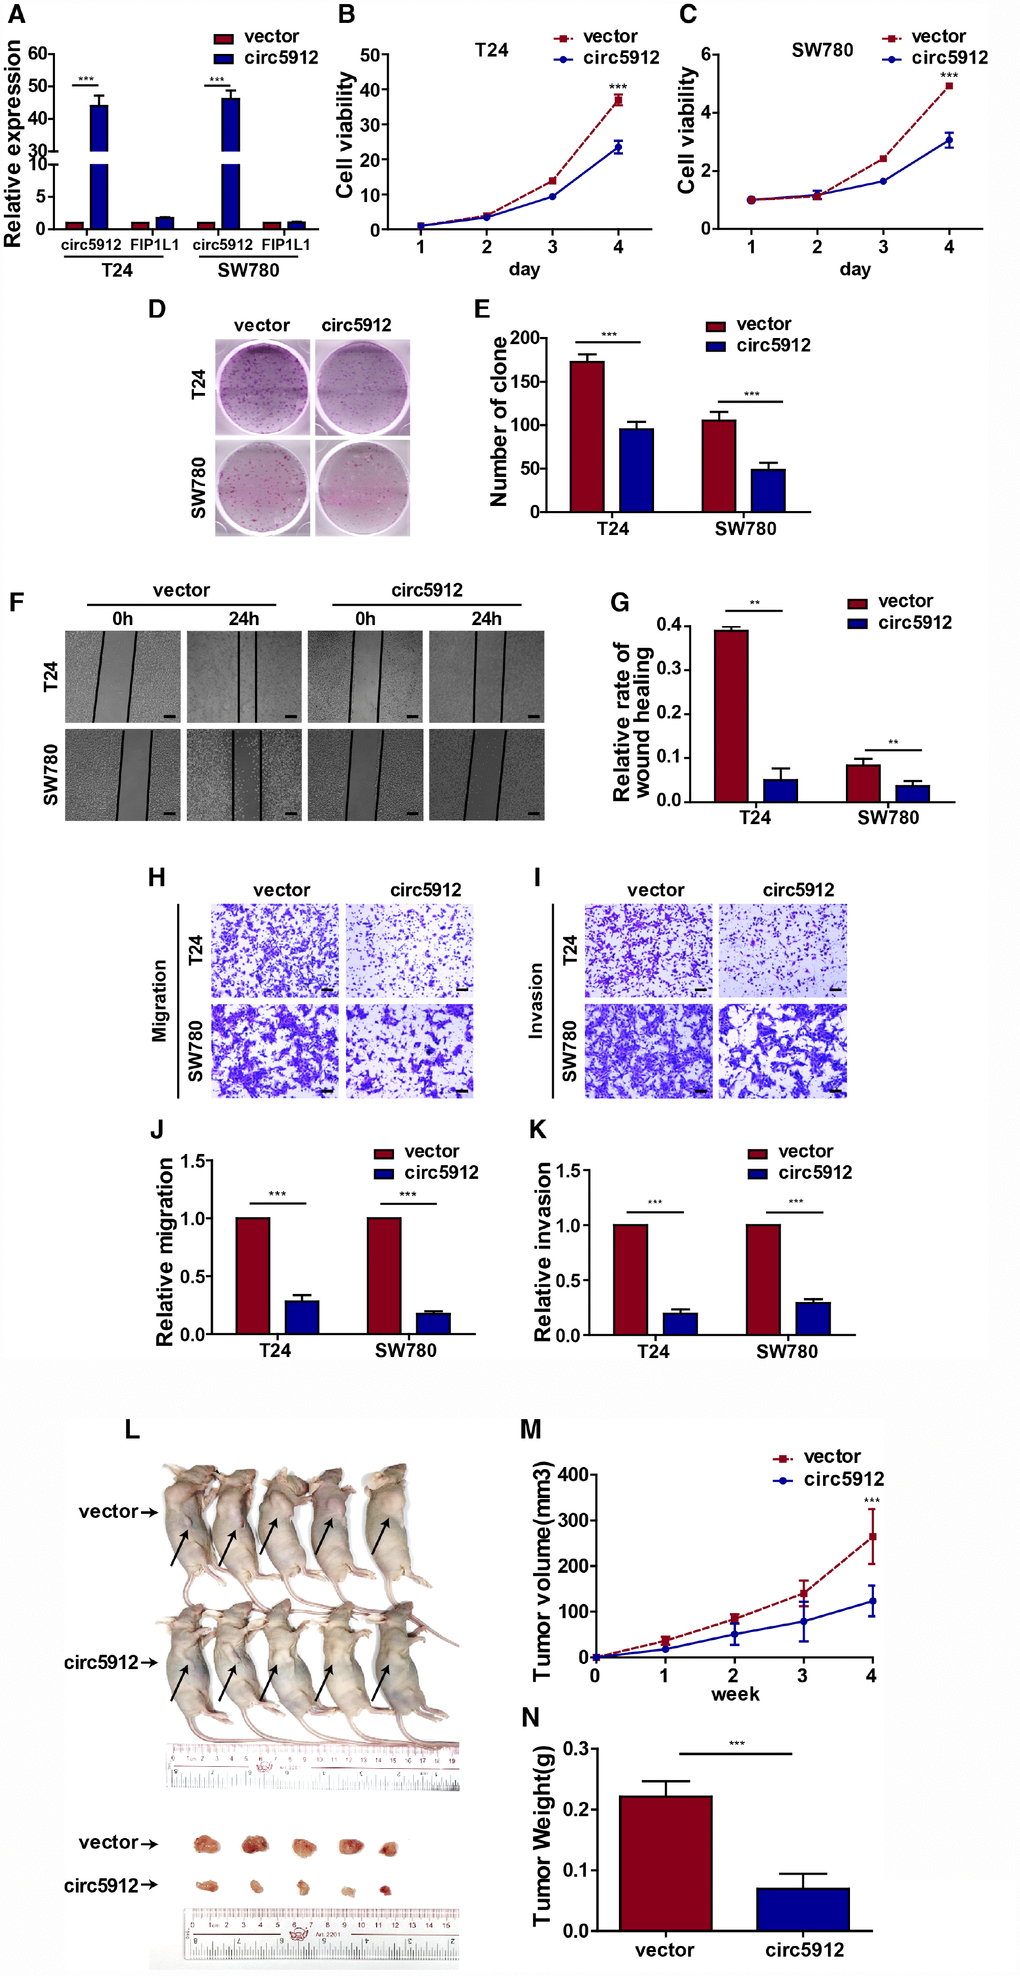 Overexpression of circ5912 suppresses bladder cancer growth and metastasis. Bladder cancer cell lines with overexpressed circ5912 were designed and produced. (A) qPCR detected levels of circ5912 and FIP1L1 after circ5912 overexpression; (B, C) a CCK8 assay was performed to evaluate cell viability; (D, E) clone-forming ability was detected; (F, G) wound healing ability was measured by the distance between the two sides of induced injury after 24 hours, scale bar: 100μm; (H–K) migration and invasion were assessed by counting cells that penetrated the trans-well membrane, scale bar: 25μm; (L–N) the in vivo effect of circ5912 was evaluated by subcutaneously injecting circ5912 overexpressing cells into nude mice. Mice were killed 4 weeks after injection, and tumor weight and volume were measured.